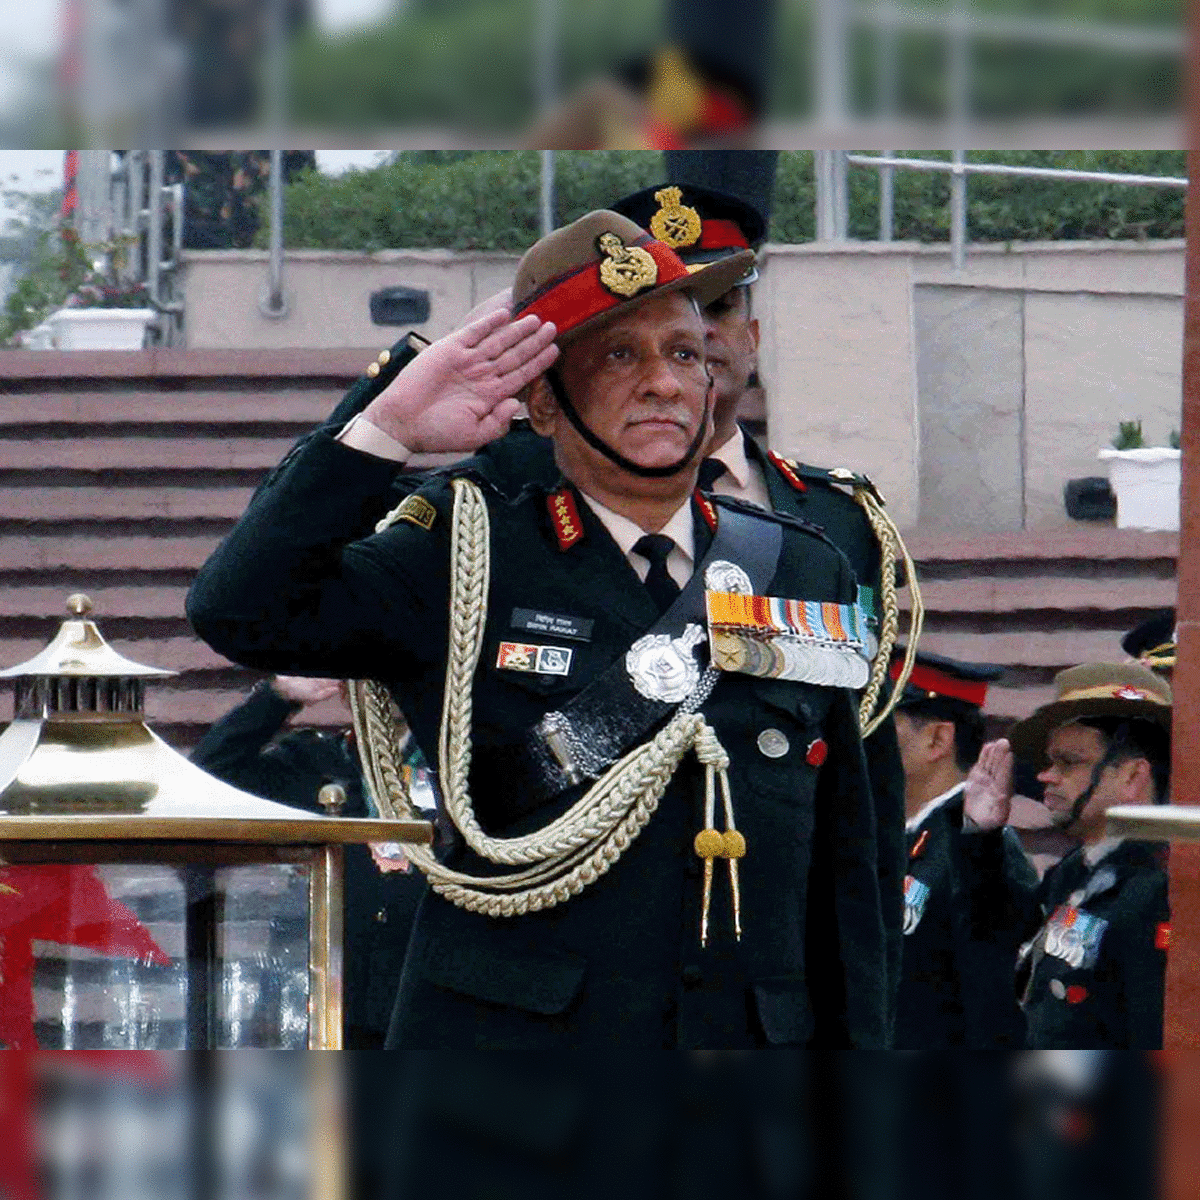 Indian Army Implements Uniform Standardization for Senior Officer